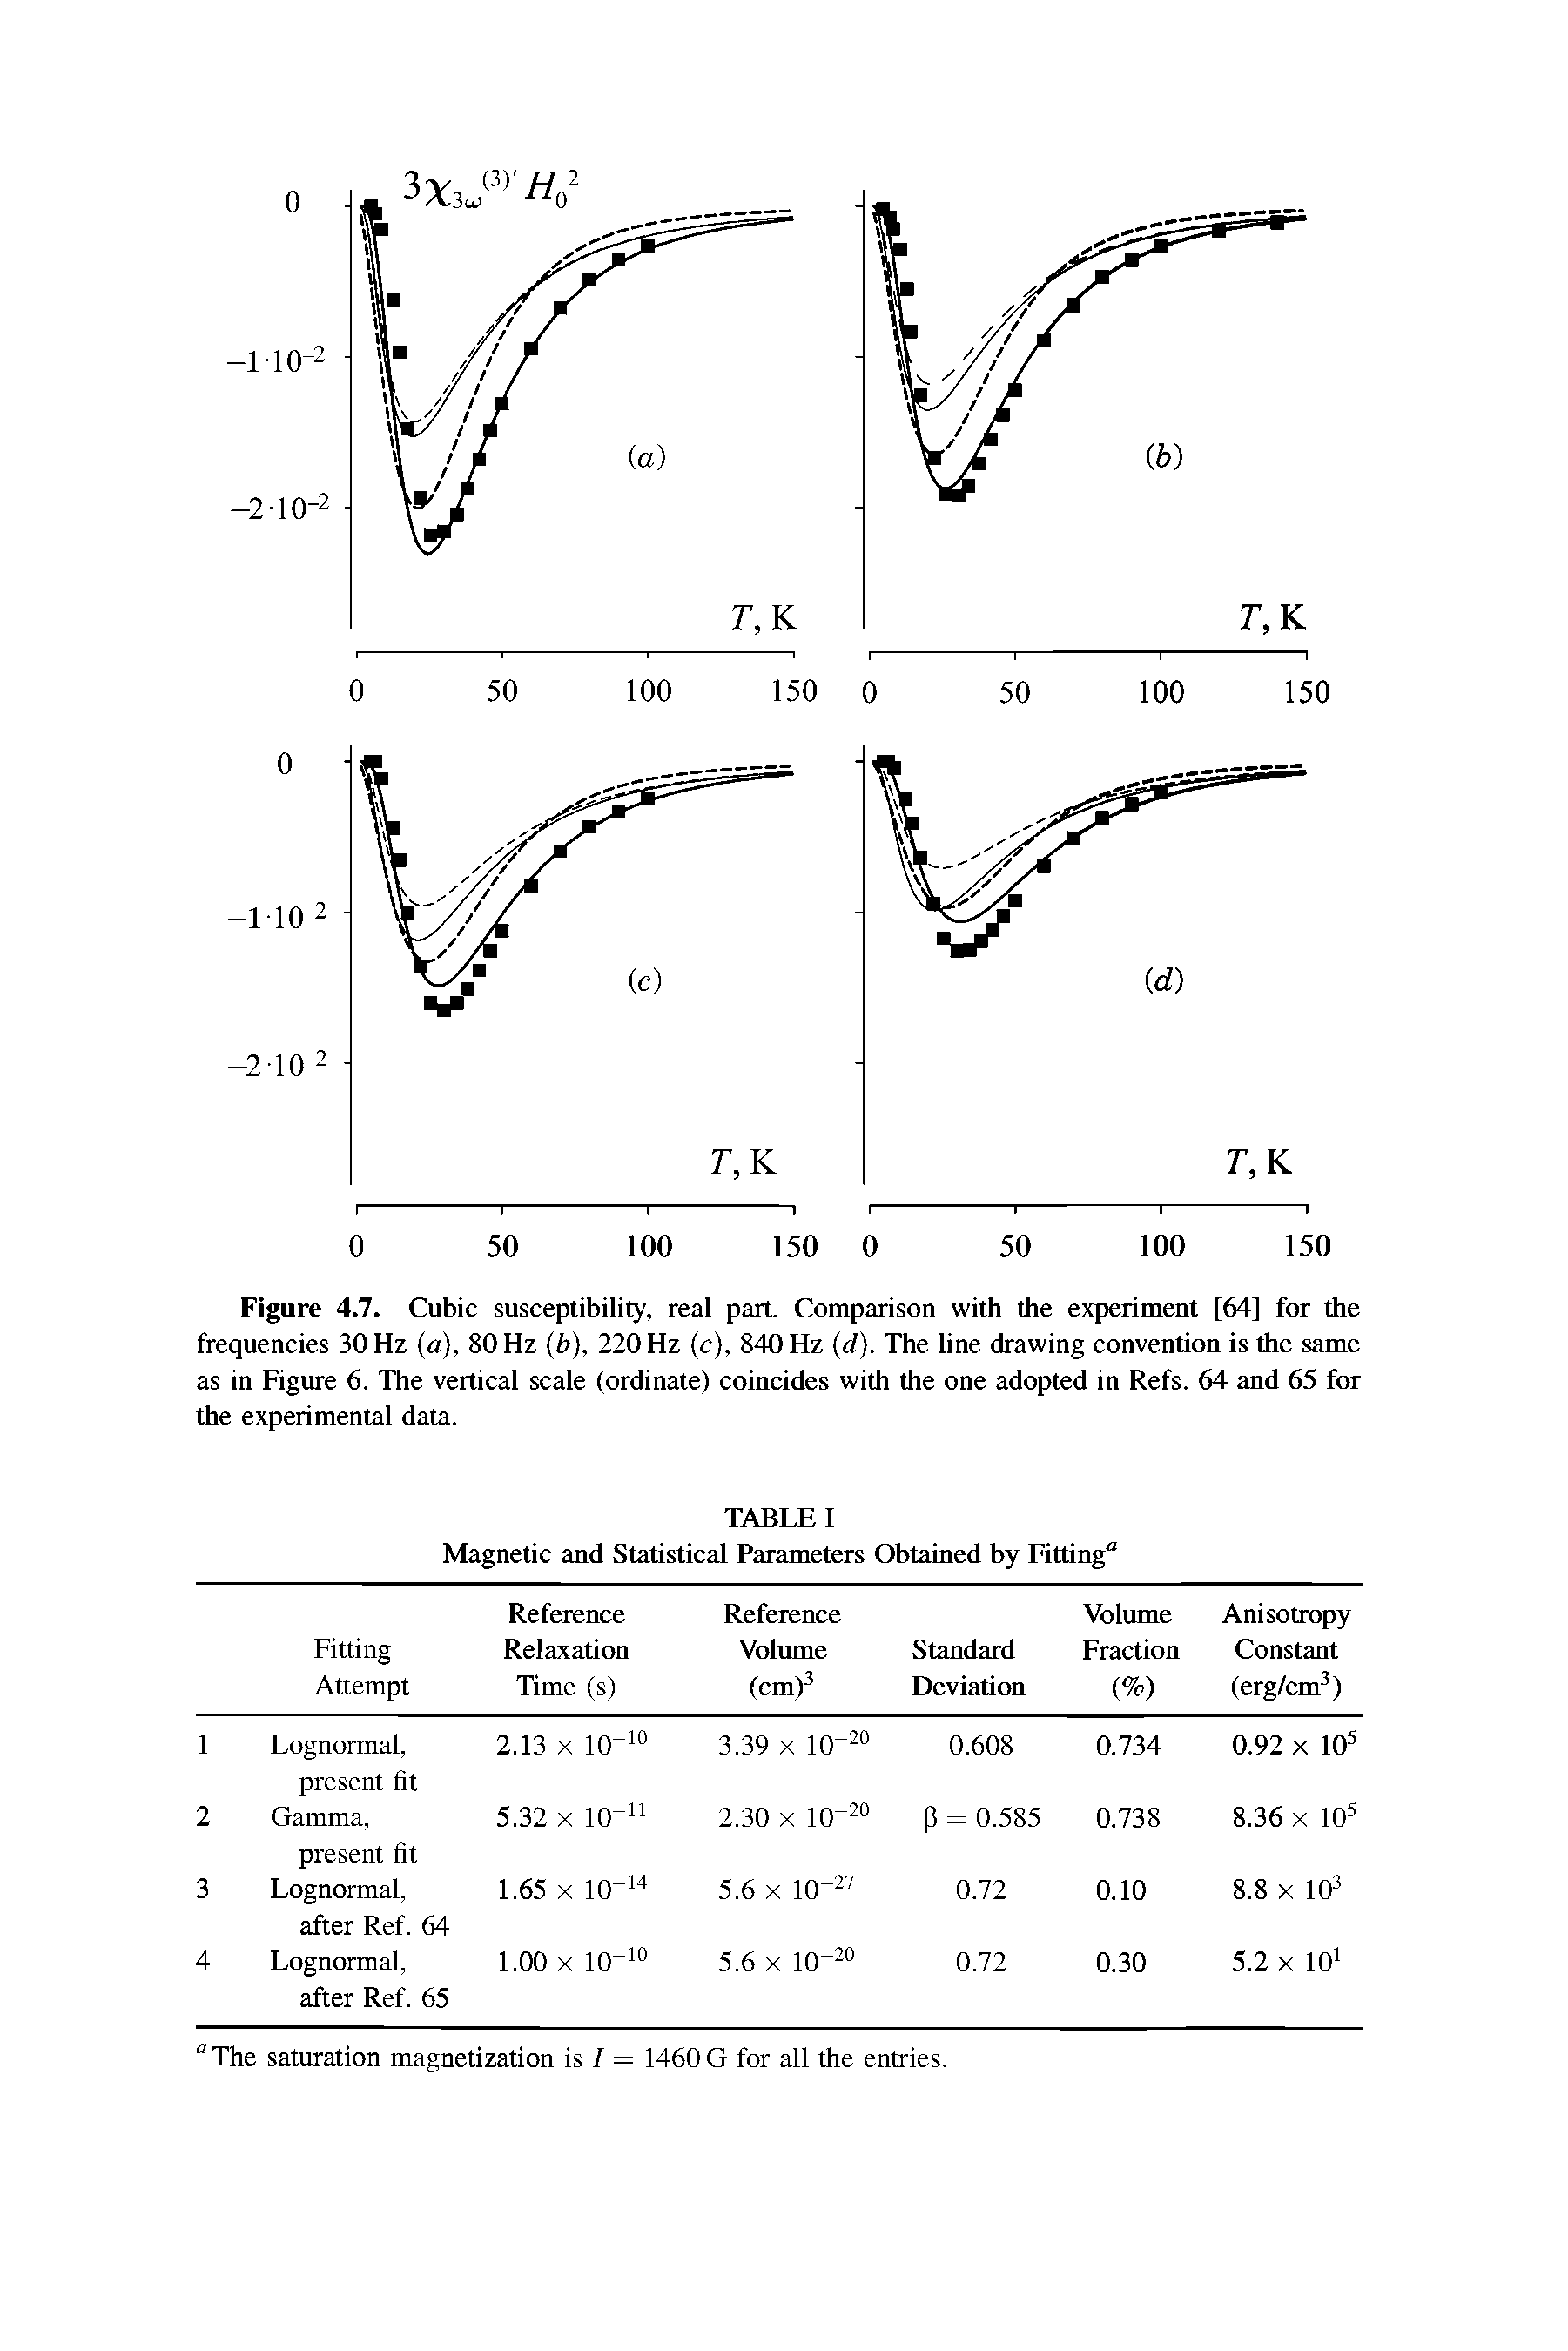 Figure 4.7. Cubic susceptibility, real part. Comparison with the experiment [64] for the frequencies 30 Hz (a), 80 Hz (b), 220 Hz (c), 840 Hz (d). The line drawing convention is the same as in Figure 6. The vertical scale (ordinate) coincides with the one adopted in Refs. 64 and 65 for the experimental data.